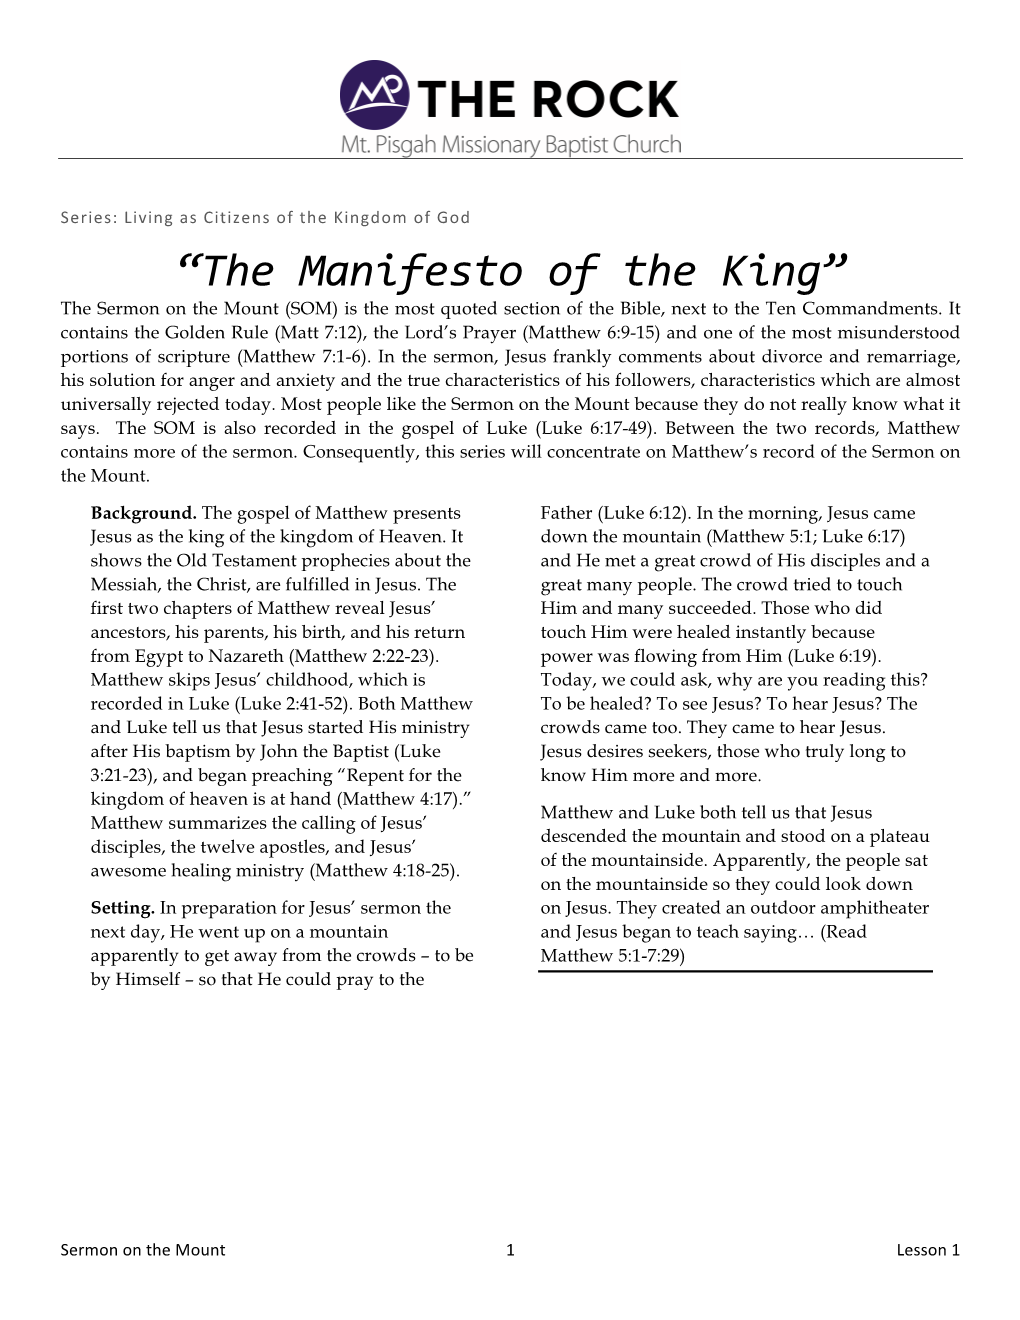 “The Manifesto of the King” the Sermon on the Mount (SOM) Is the Most Quoted Section of the Bible, Next to the Ten Commandments